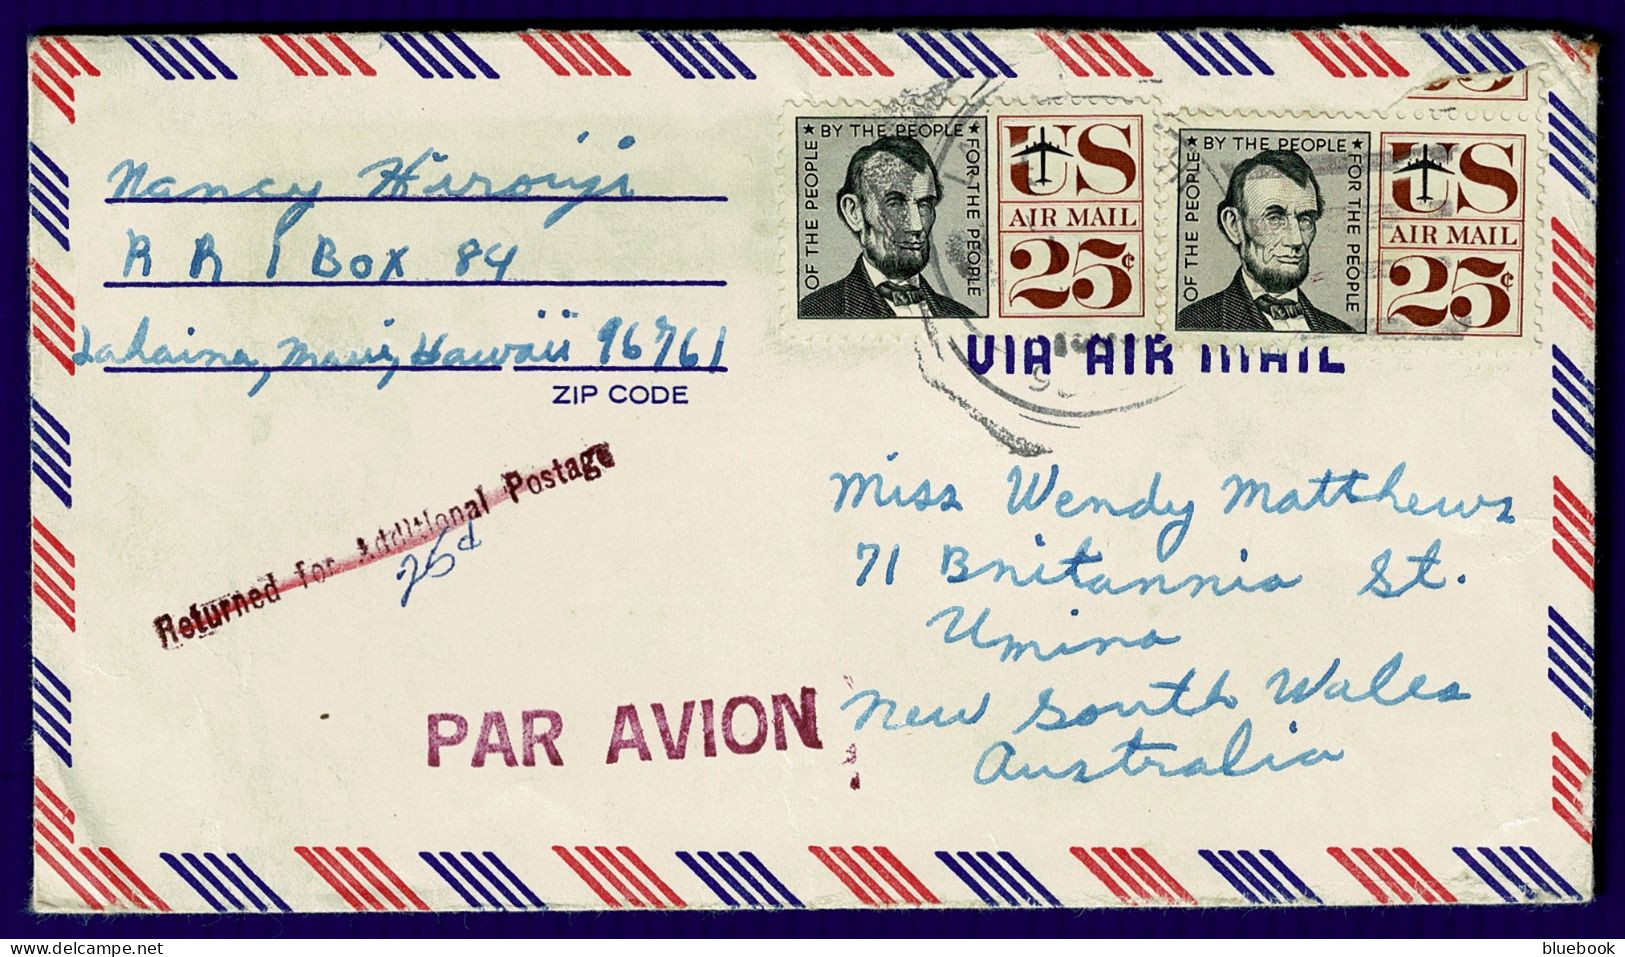 Ref 1648 - 1960's Airmail Cover Lahaina Hawaii USA To Australia - 50c Rate? Insufficient Postage Instructional Mark - Hawaii